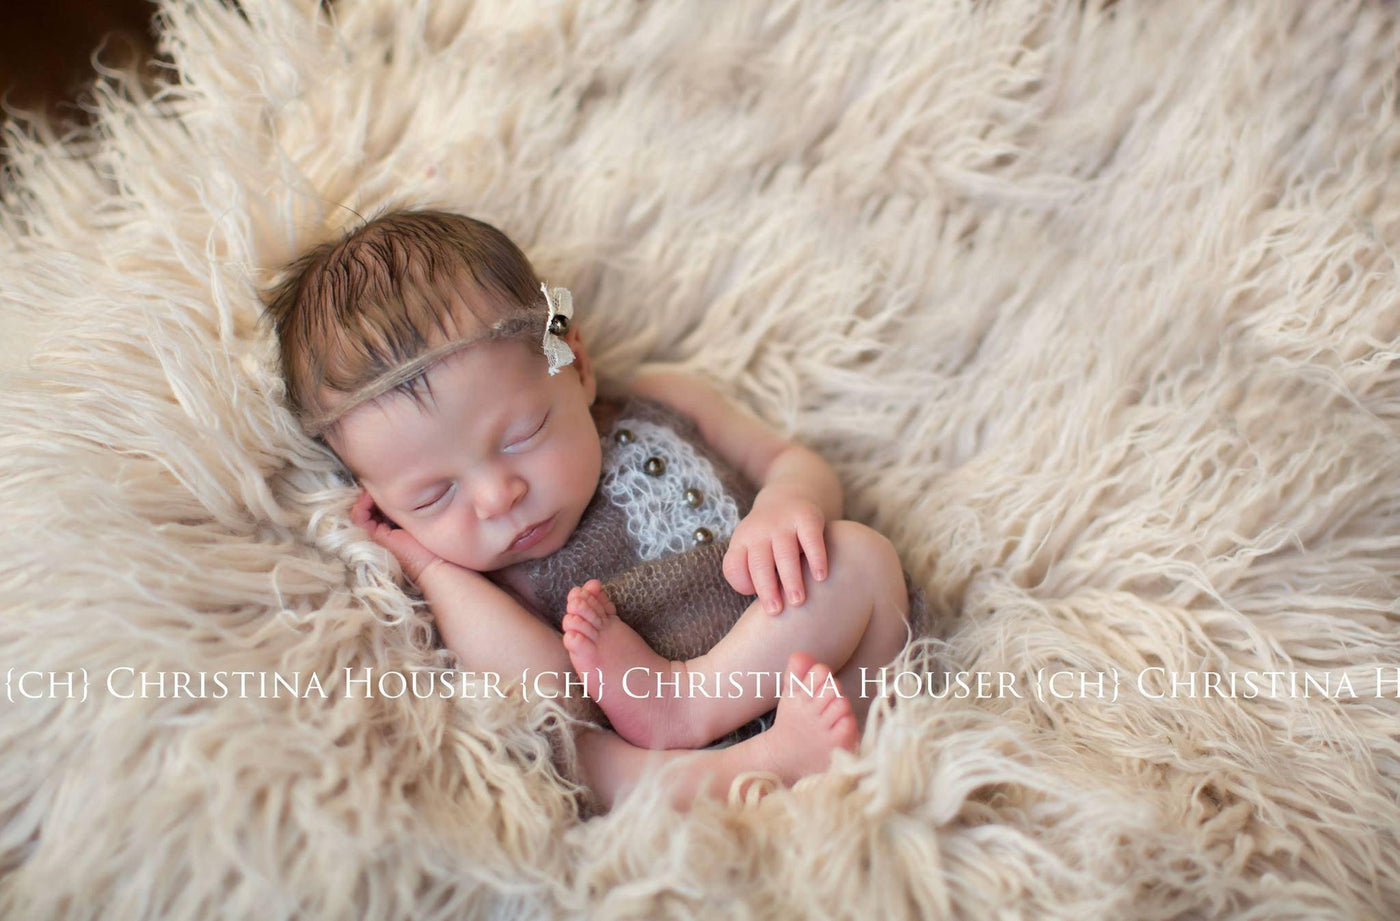 SET Brown Mohair Overalls Pants and Lace Pearl Headband - Beautiful Photo Props